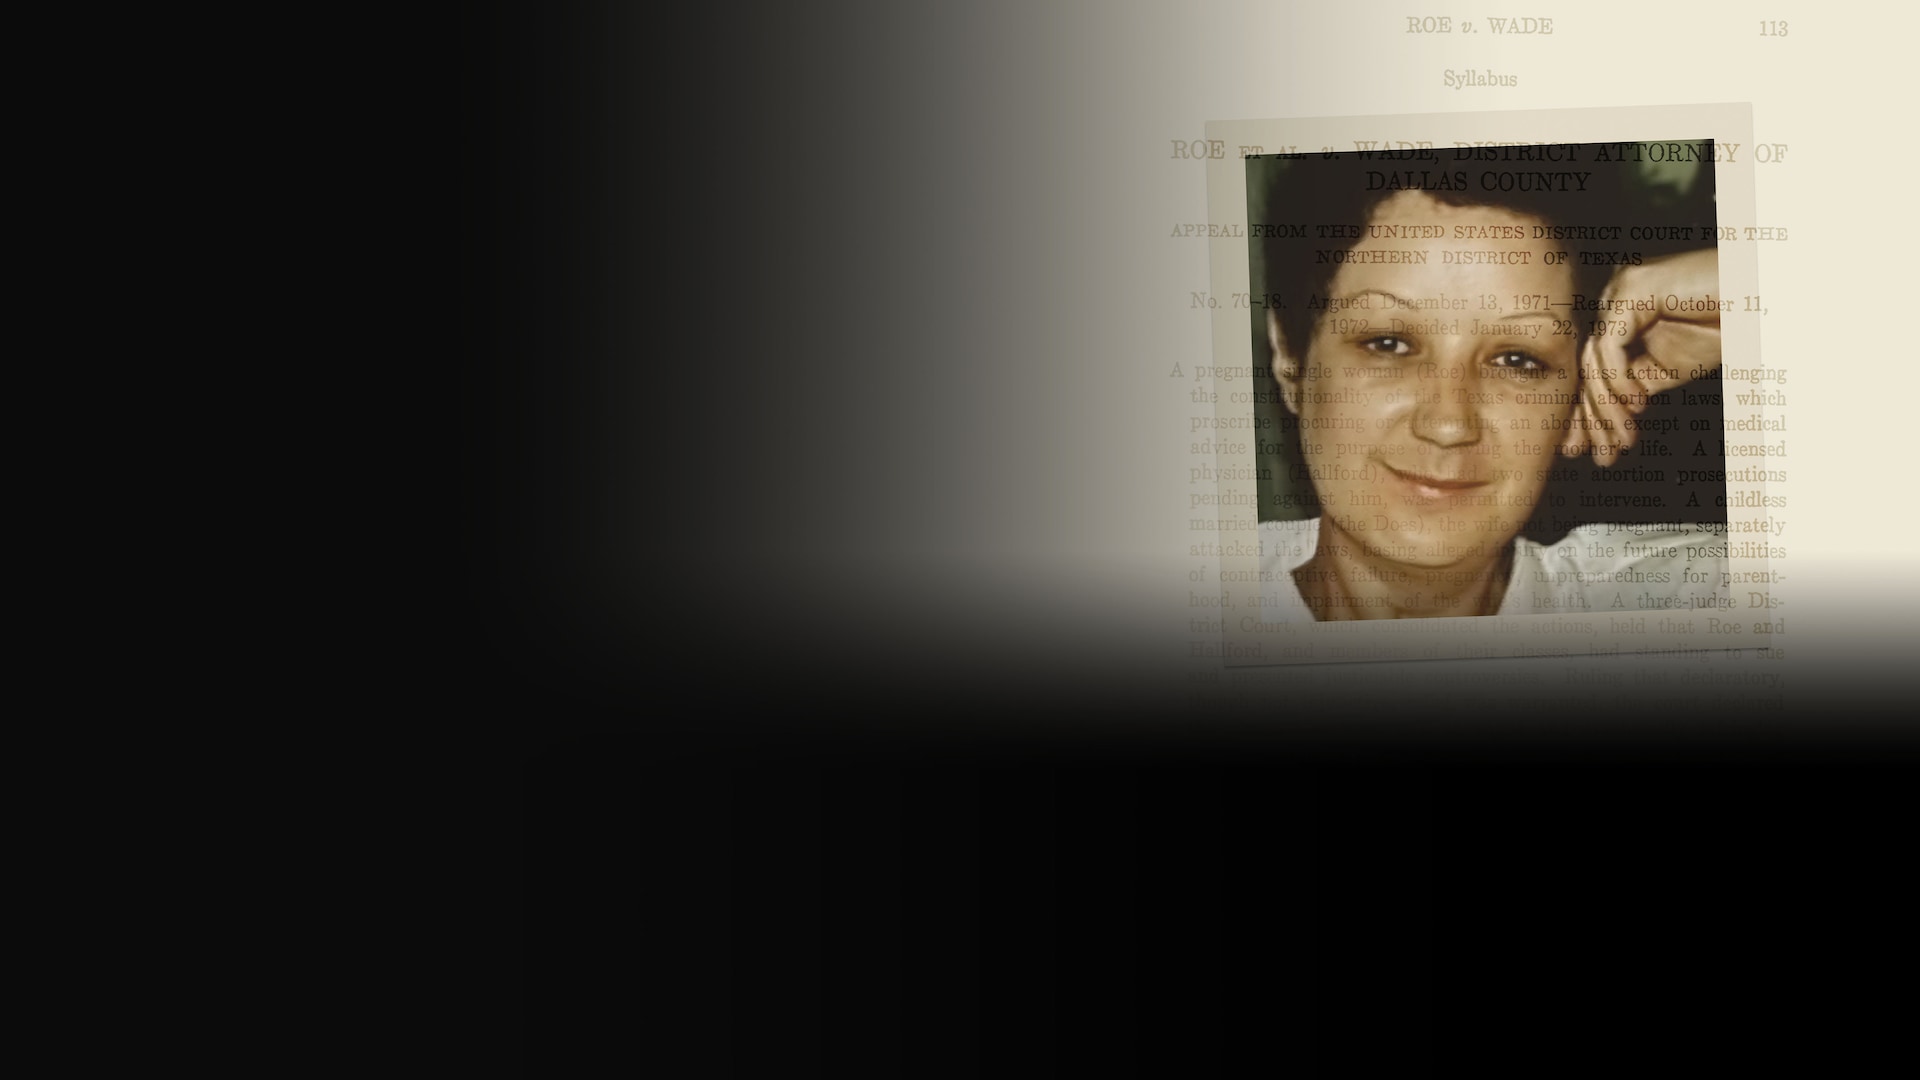 AKA Jane Roe Polaroid image of Norma McCorvey smiling and posing with hand on her face with Roe v Wade court document overlay